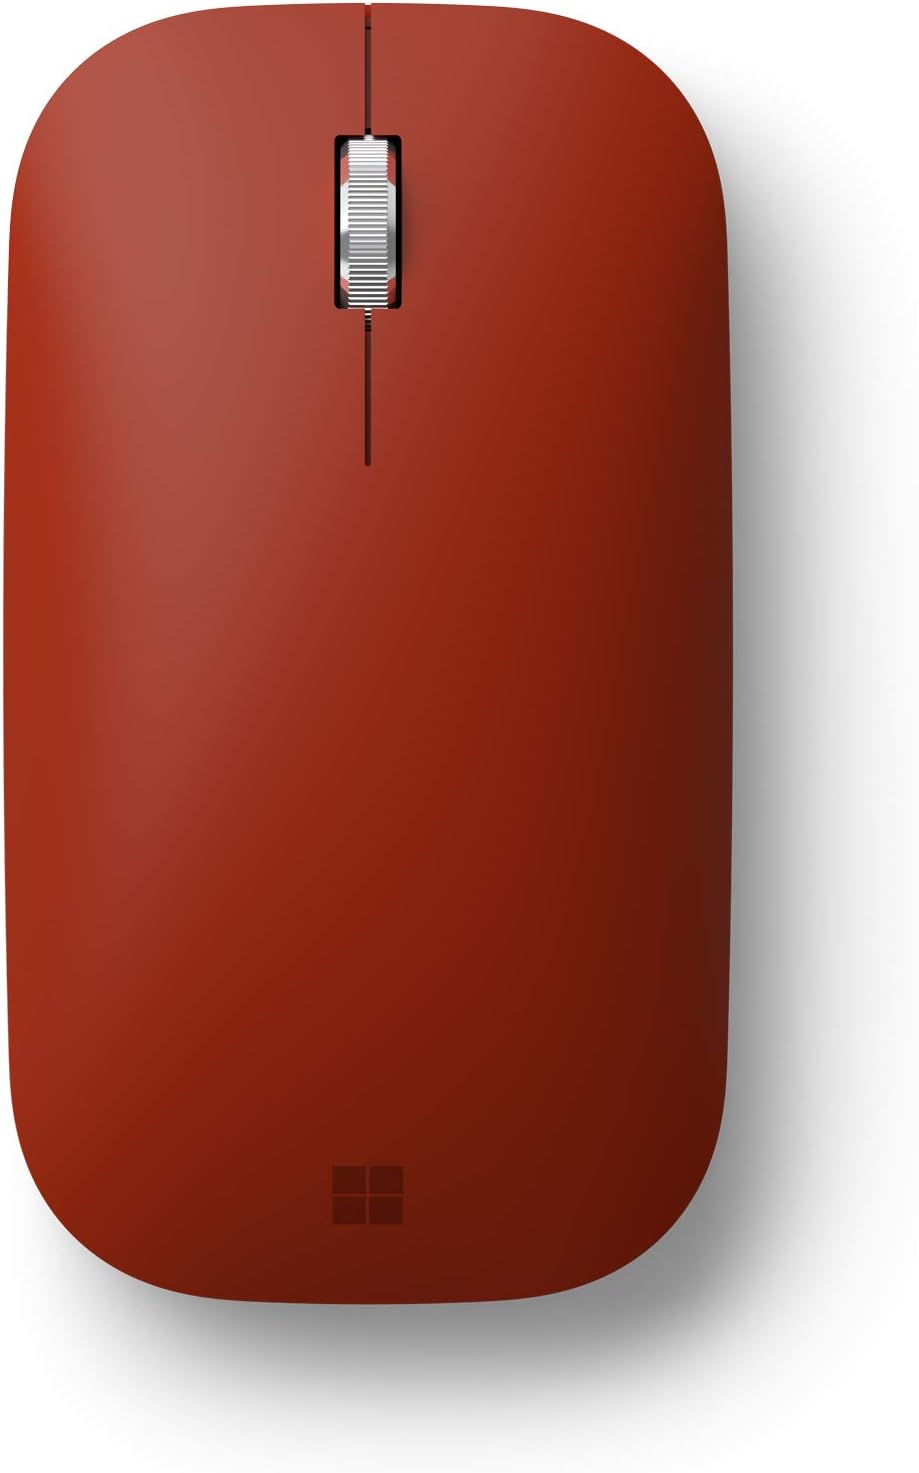 Microsoft Modern Mobile Mouse - Poppy Red